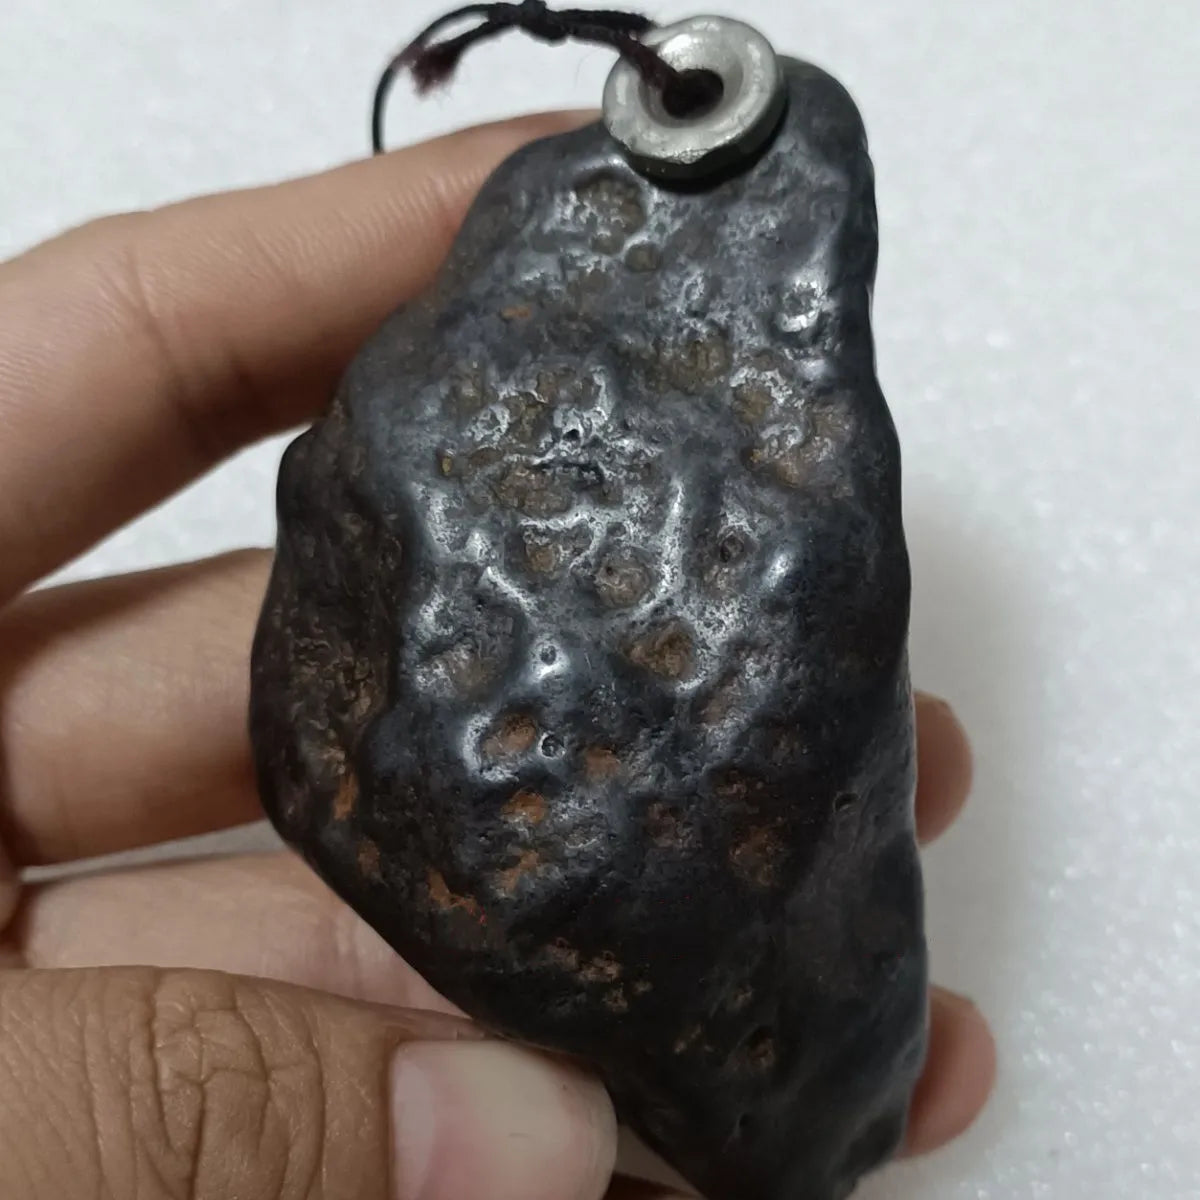 1Pcs Rare Natural Meteorite Iron Meteorite Protolith Strong Magnetism Falling Stone Collection Home Decorations Ornament Gift